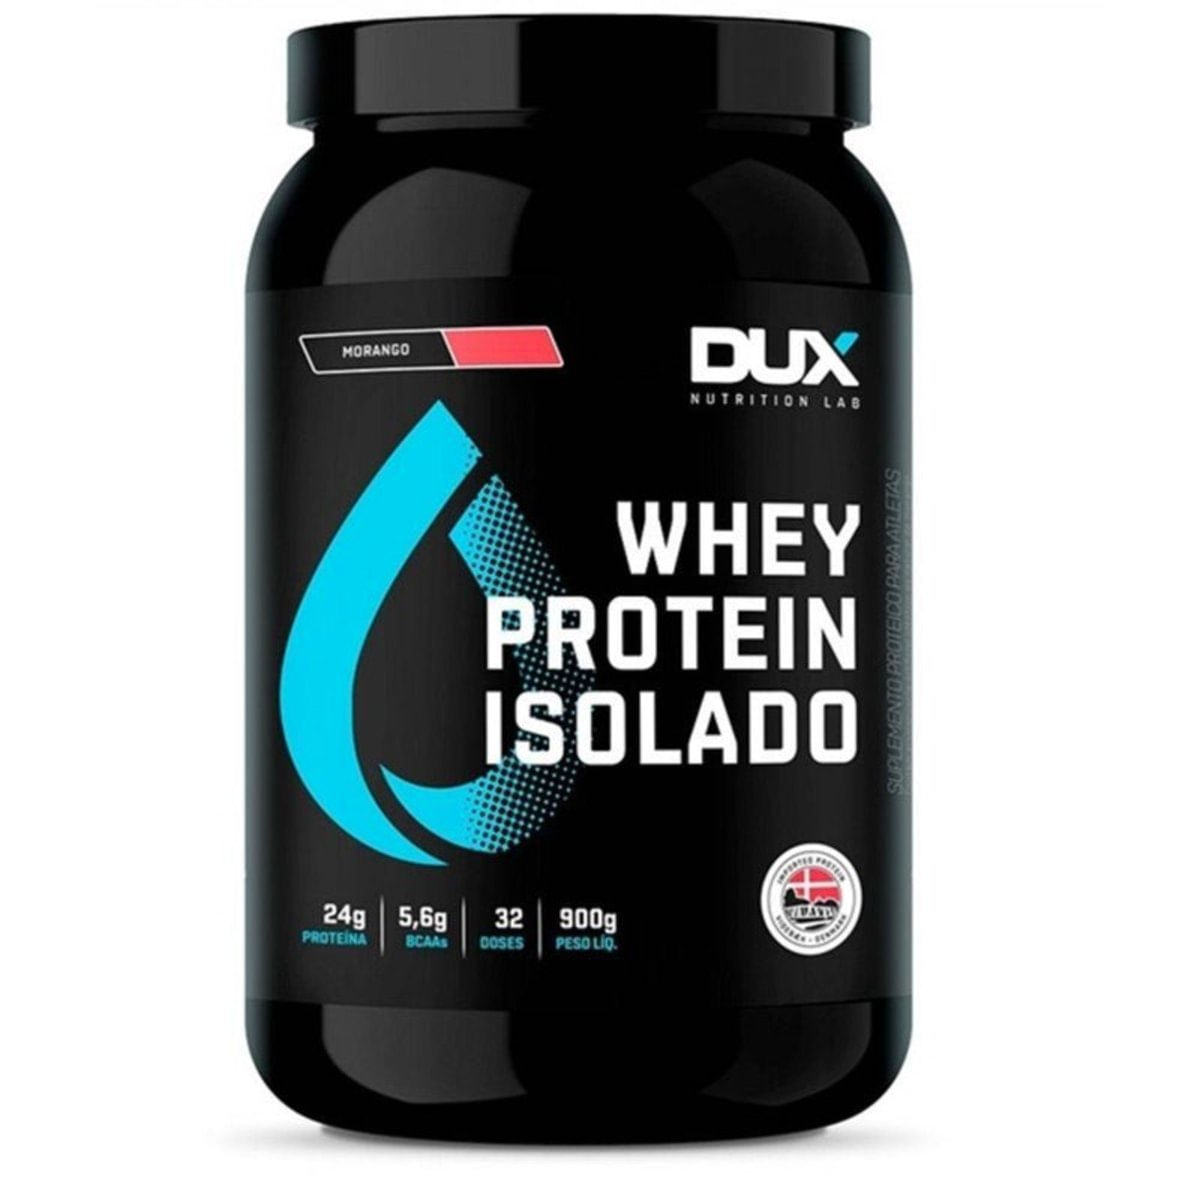 4. Whey protein isolado all natural – Dux Nutrition